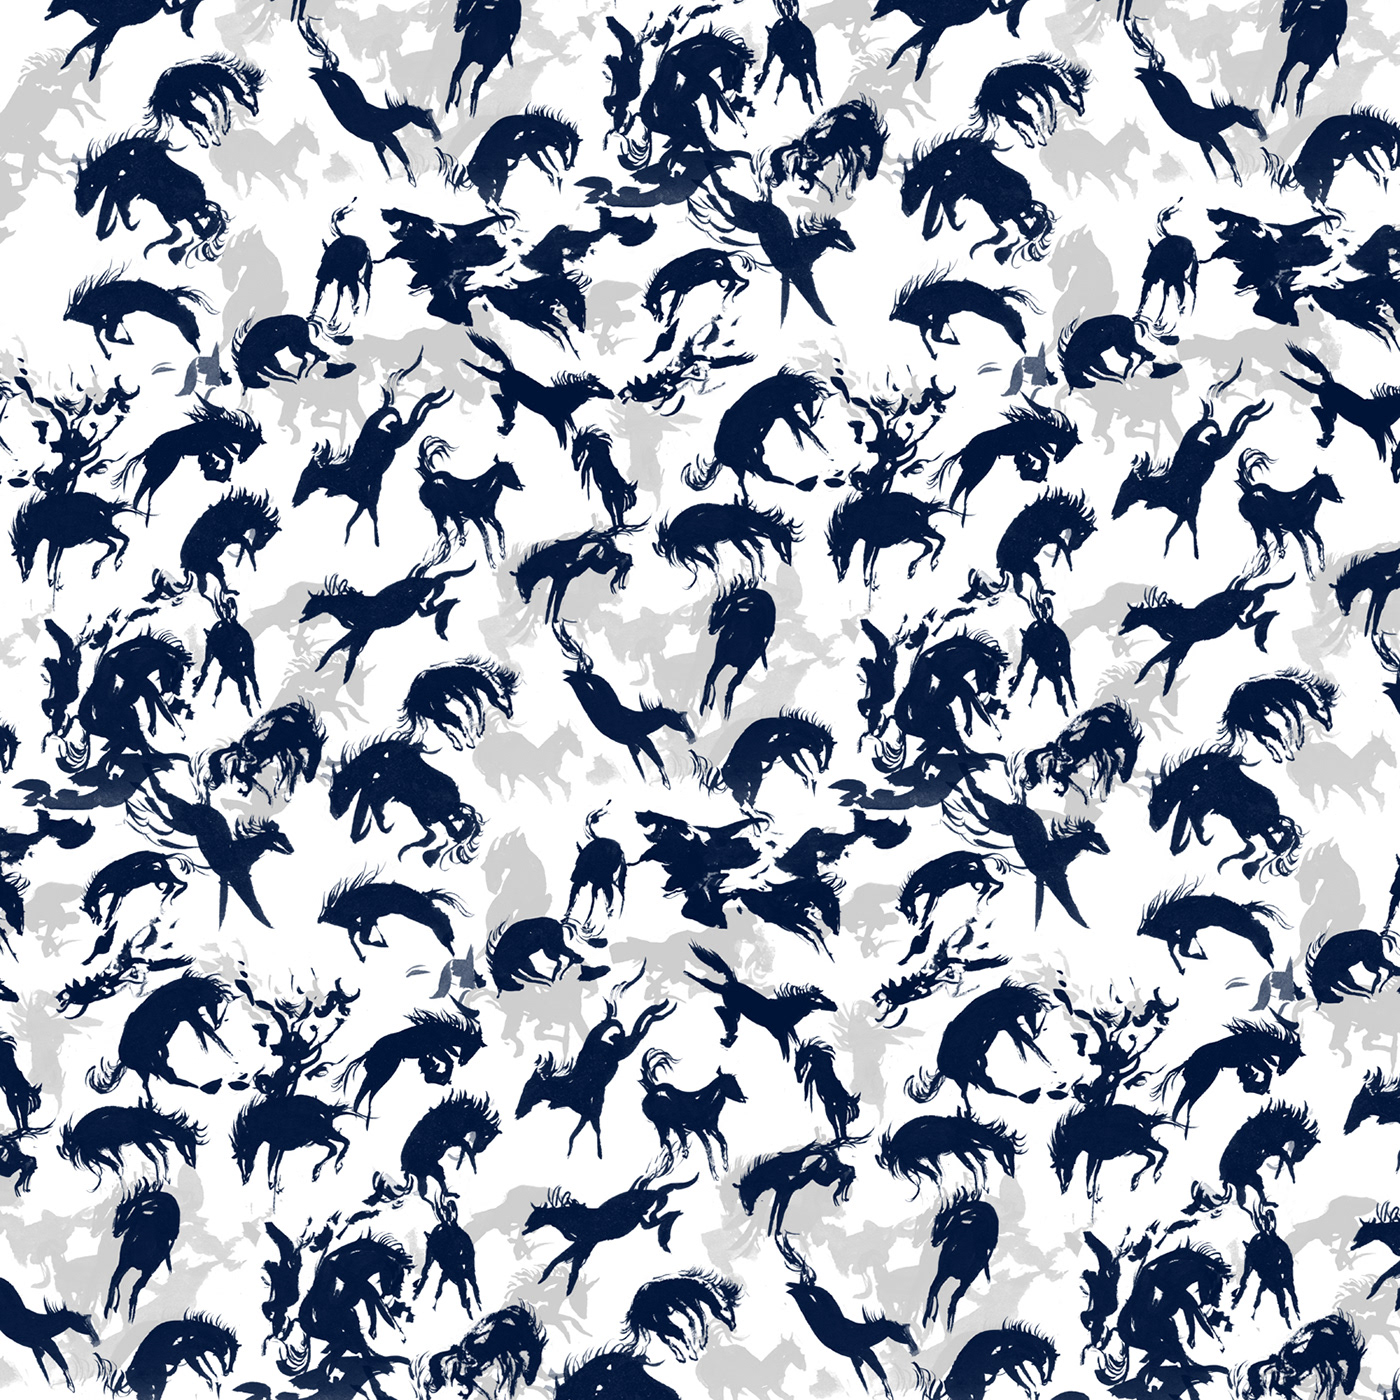 silk screen ink horses ponies pattern animals pattern design  movement ILLUSTRATION  abstract